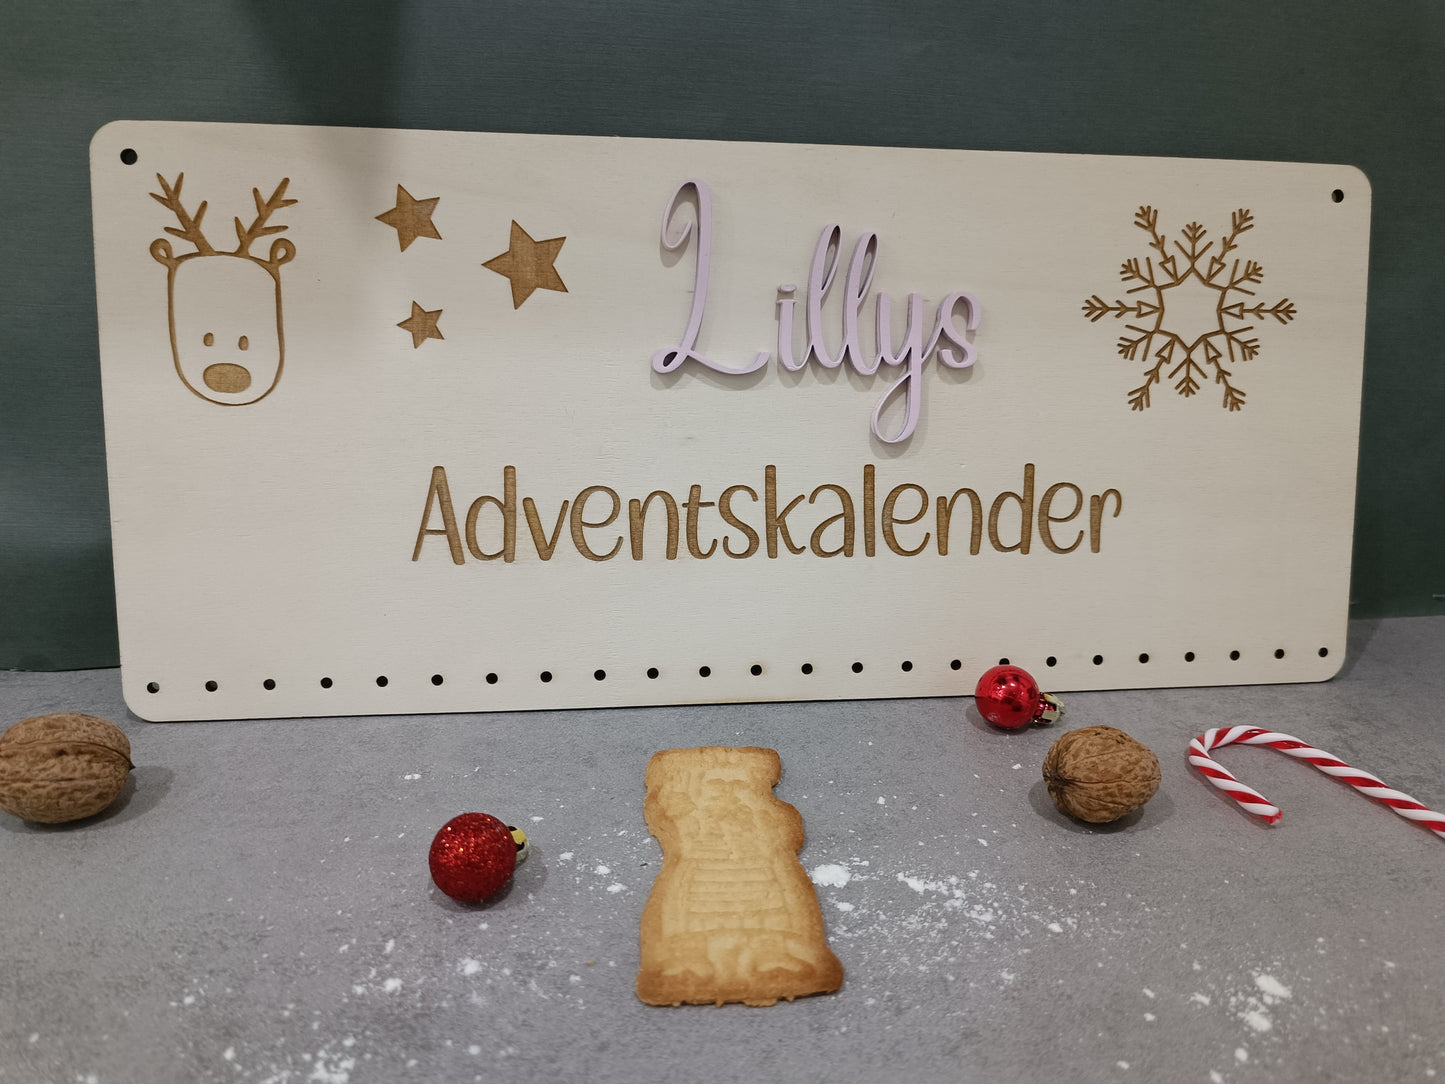 Personalized Advent calendar made of wood/Advent calendar with names/Christmas/Advent calendar for children/Advent calendar to fill